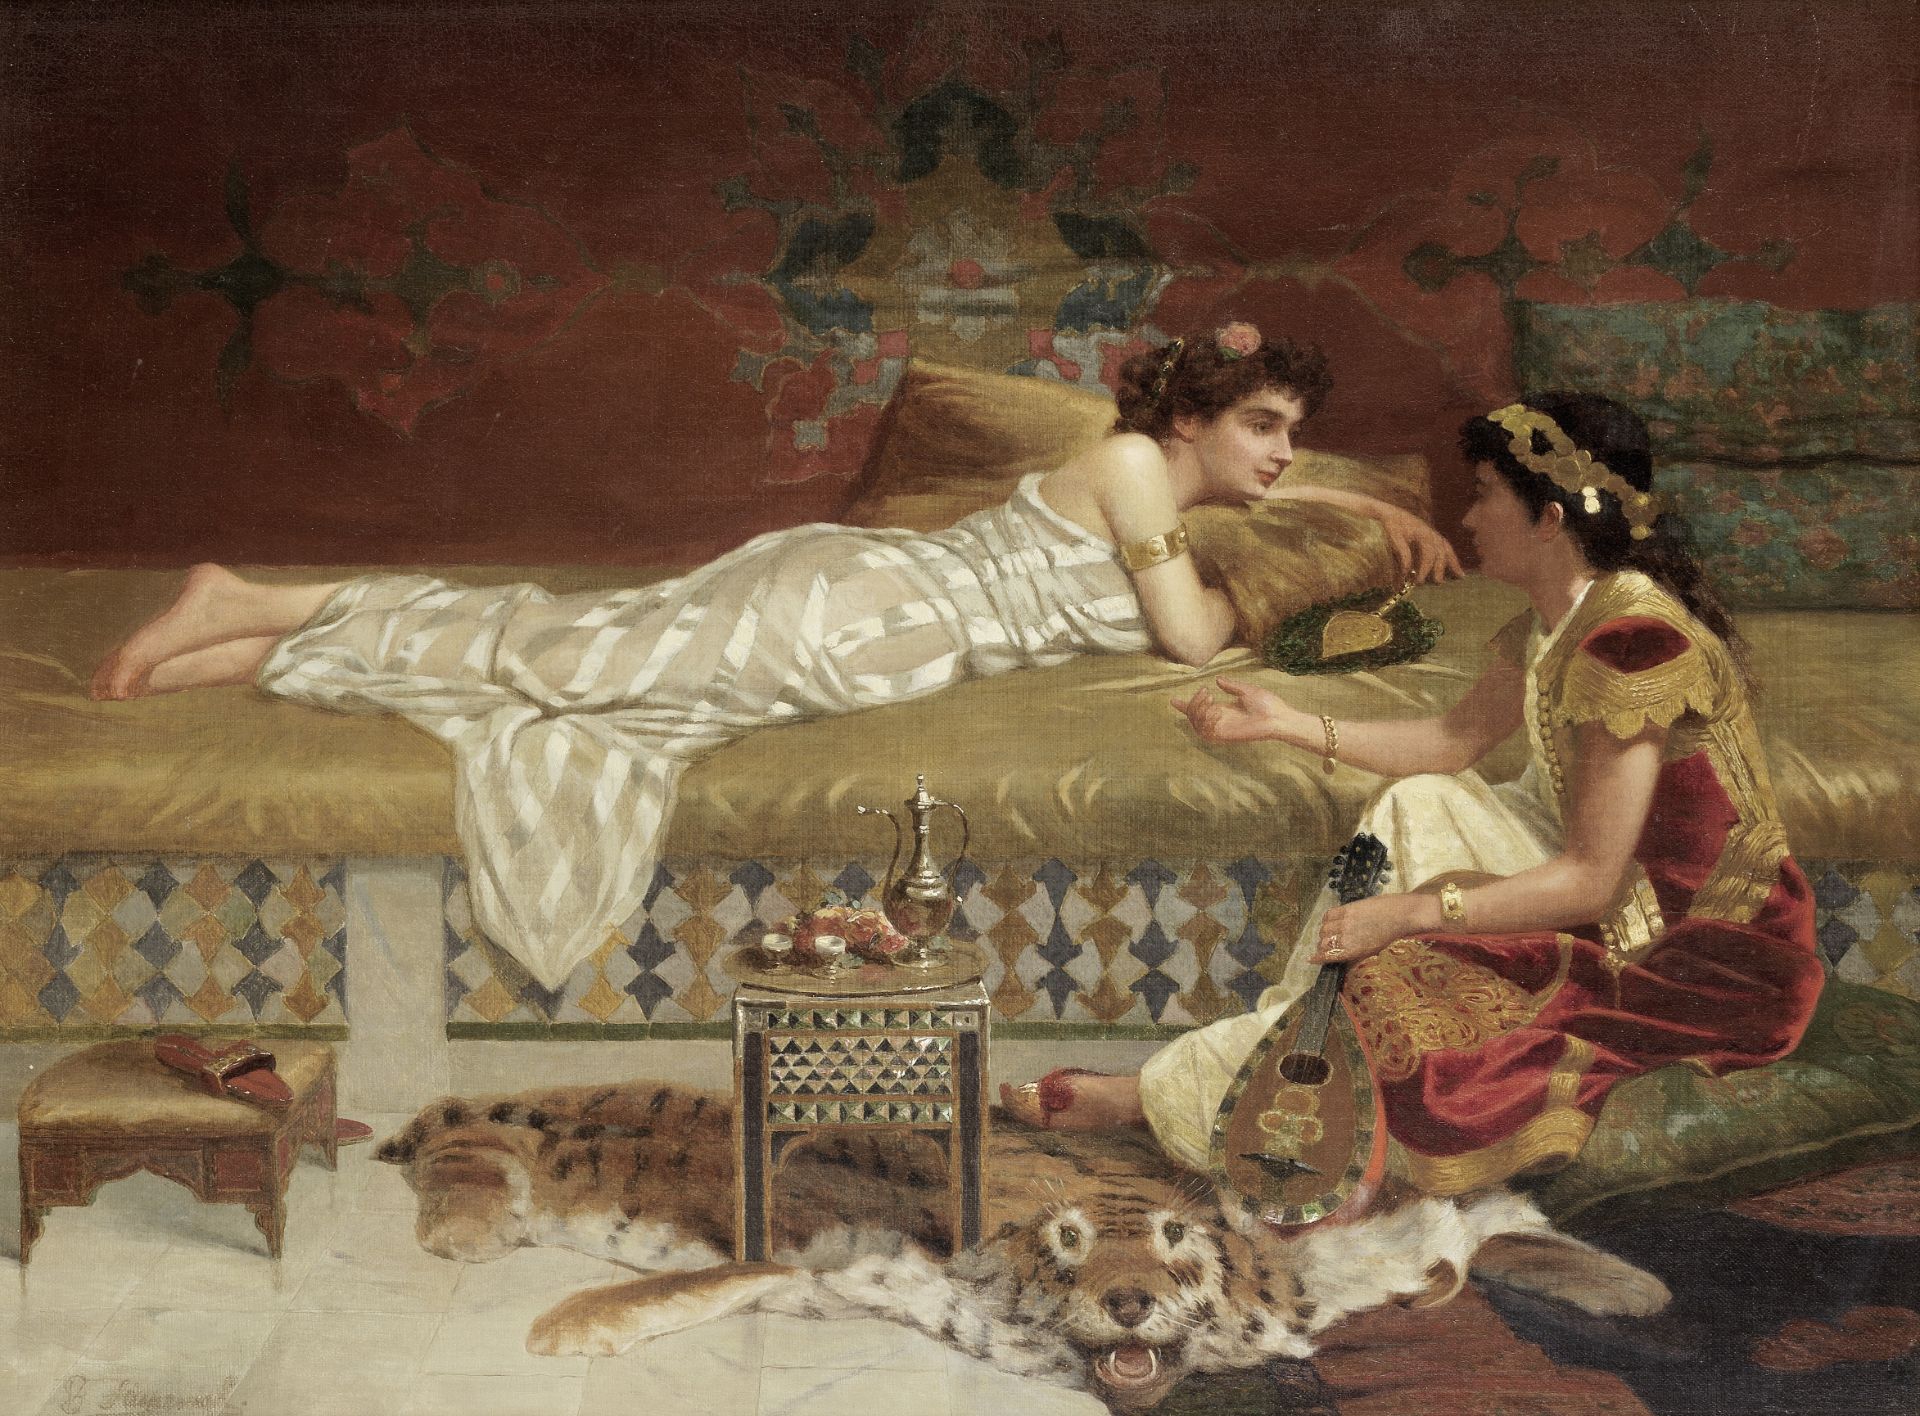 Vincent G. Stiepevich (Russian/American, 1841-1910) In the harem